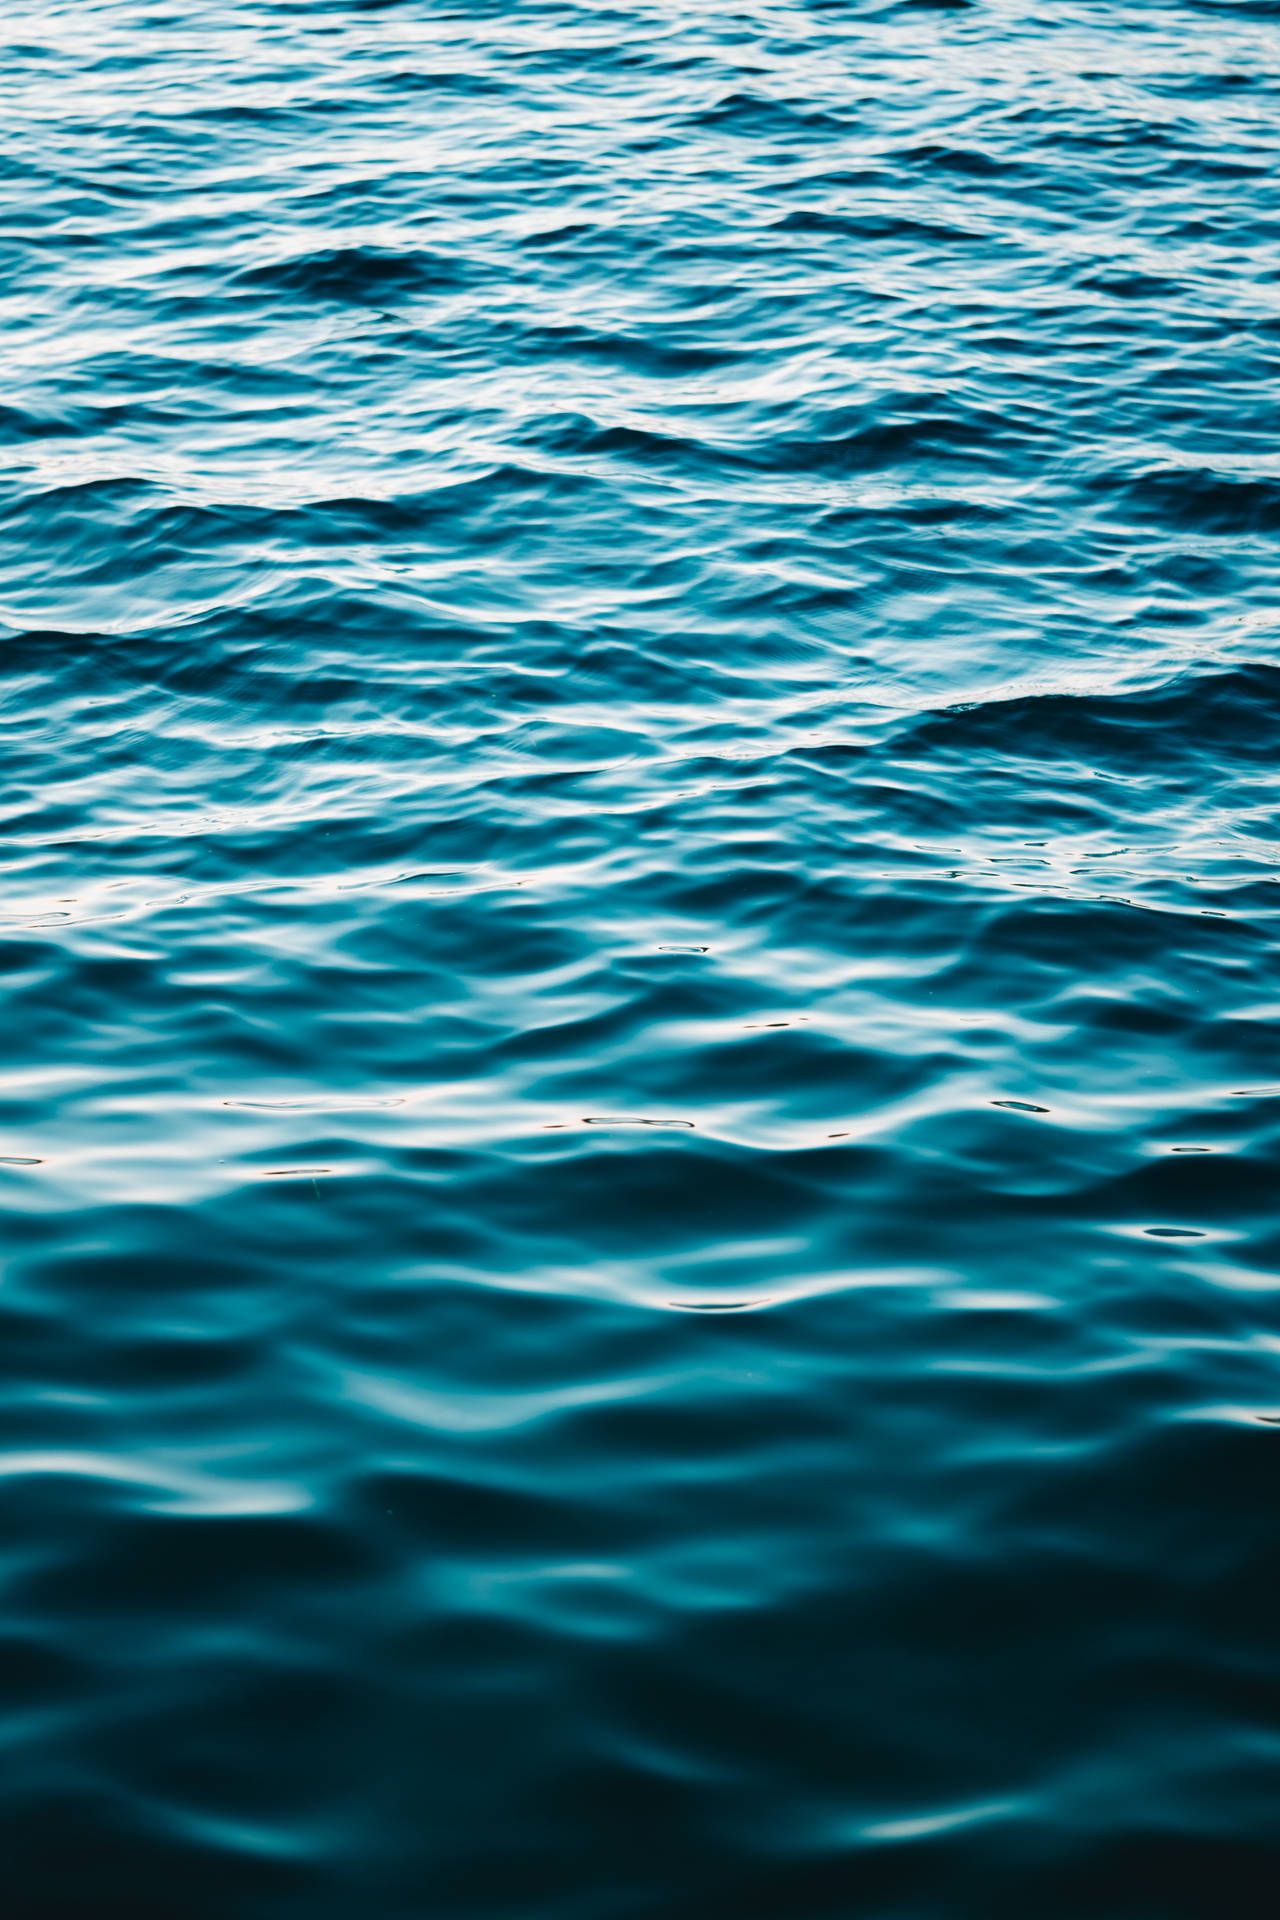 A close up of the ocean water with small ripples - Ocean